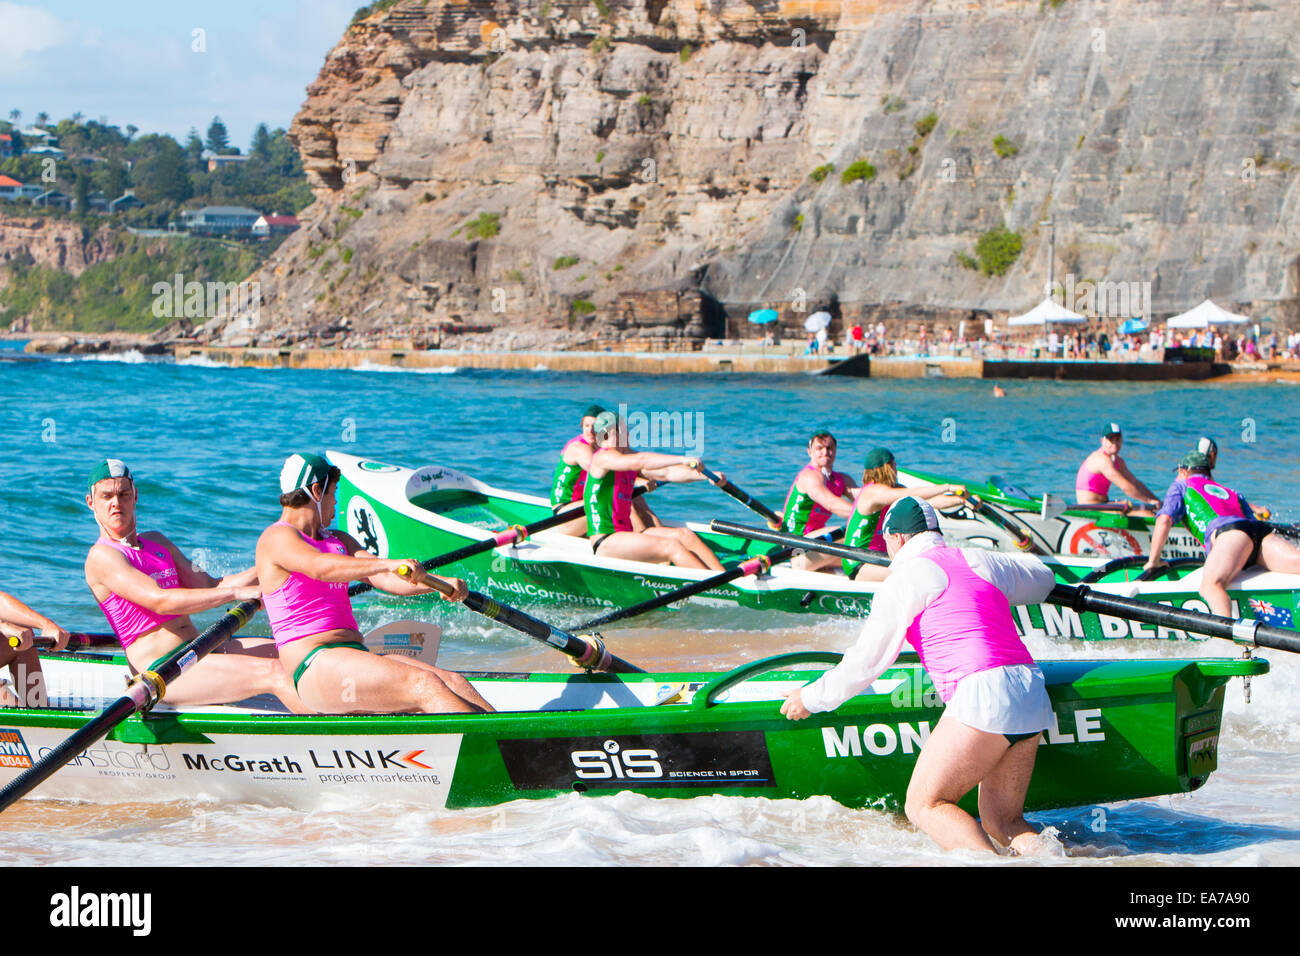 Sydney, Australia. 8th Nov, 2014. Summer surfboat racing competition amongst surfclubs located on Sydney's northern beaches begins at Bilgola Beach. NSW Australia Credit:  martin berry/Alamy Live News Stock Photo